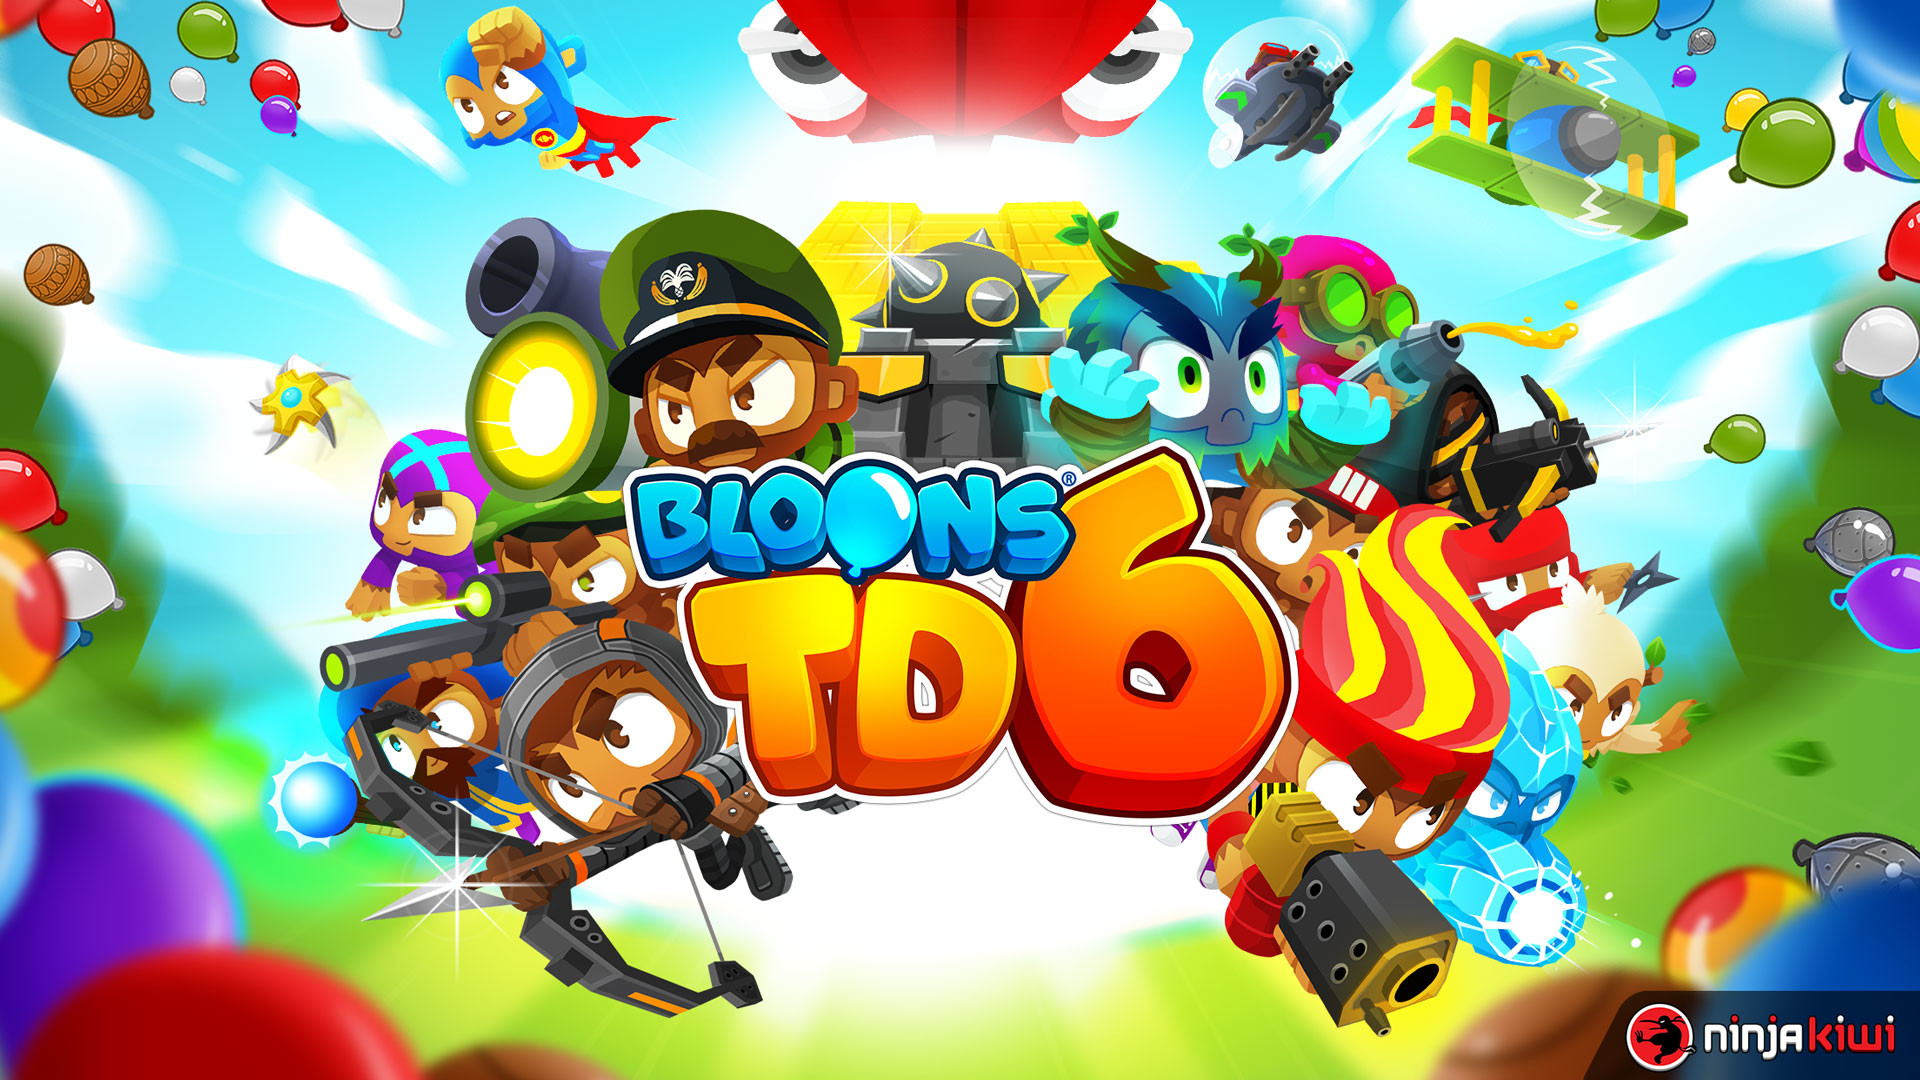 bloon td 6 characters